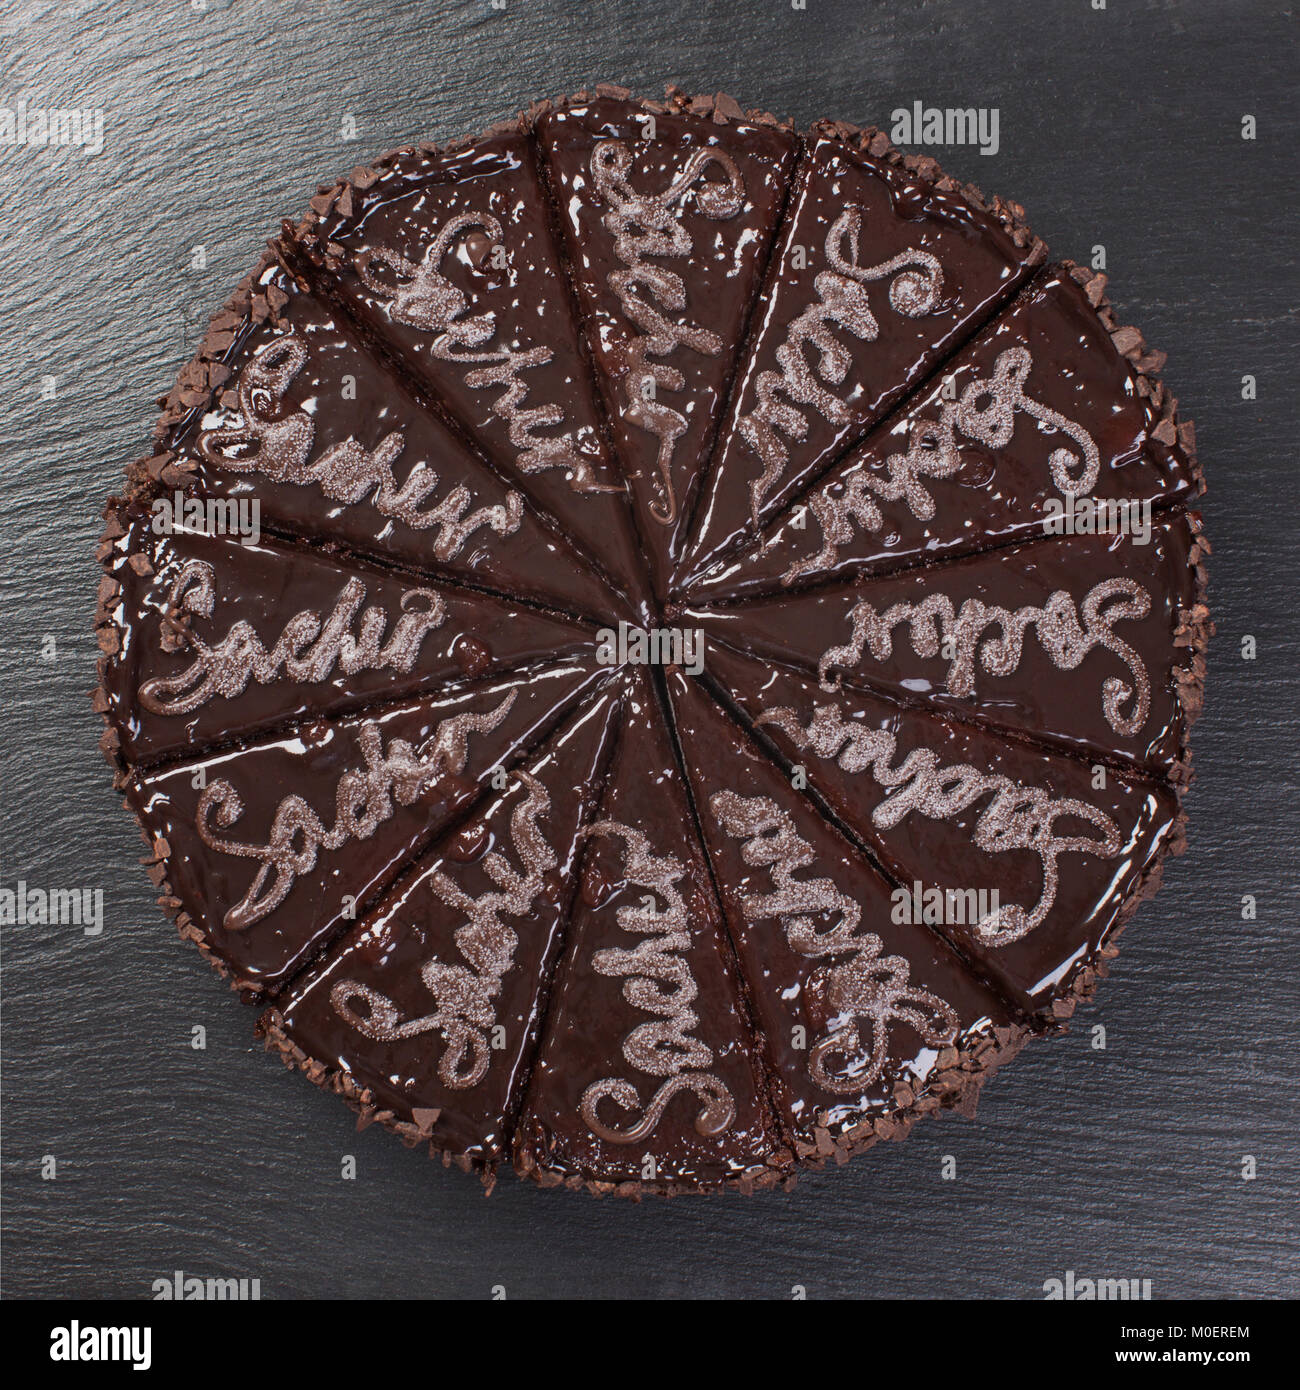 Chocolate cake cut in pieces, on black background. Stock Photo